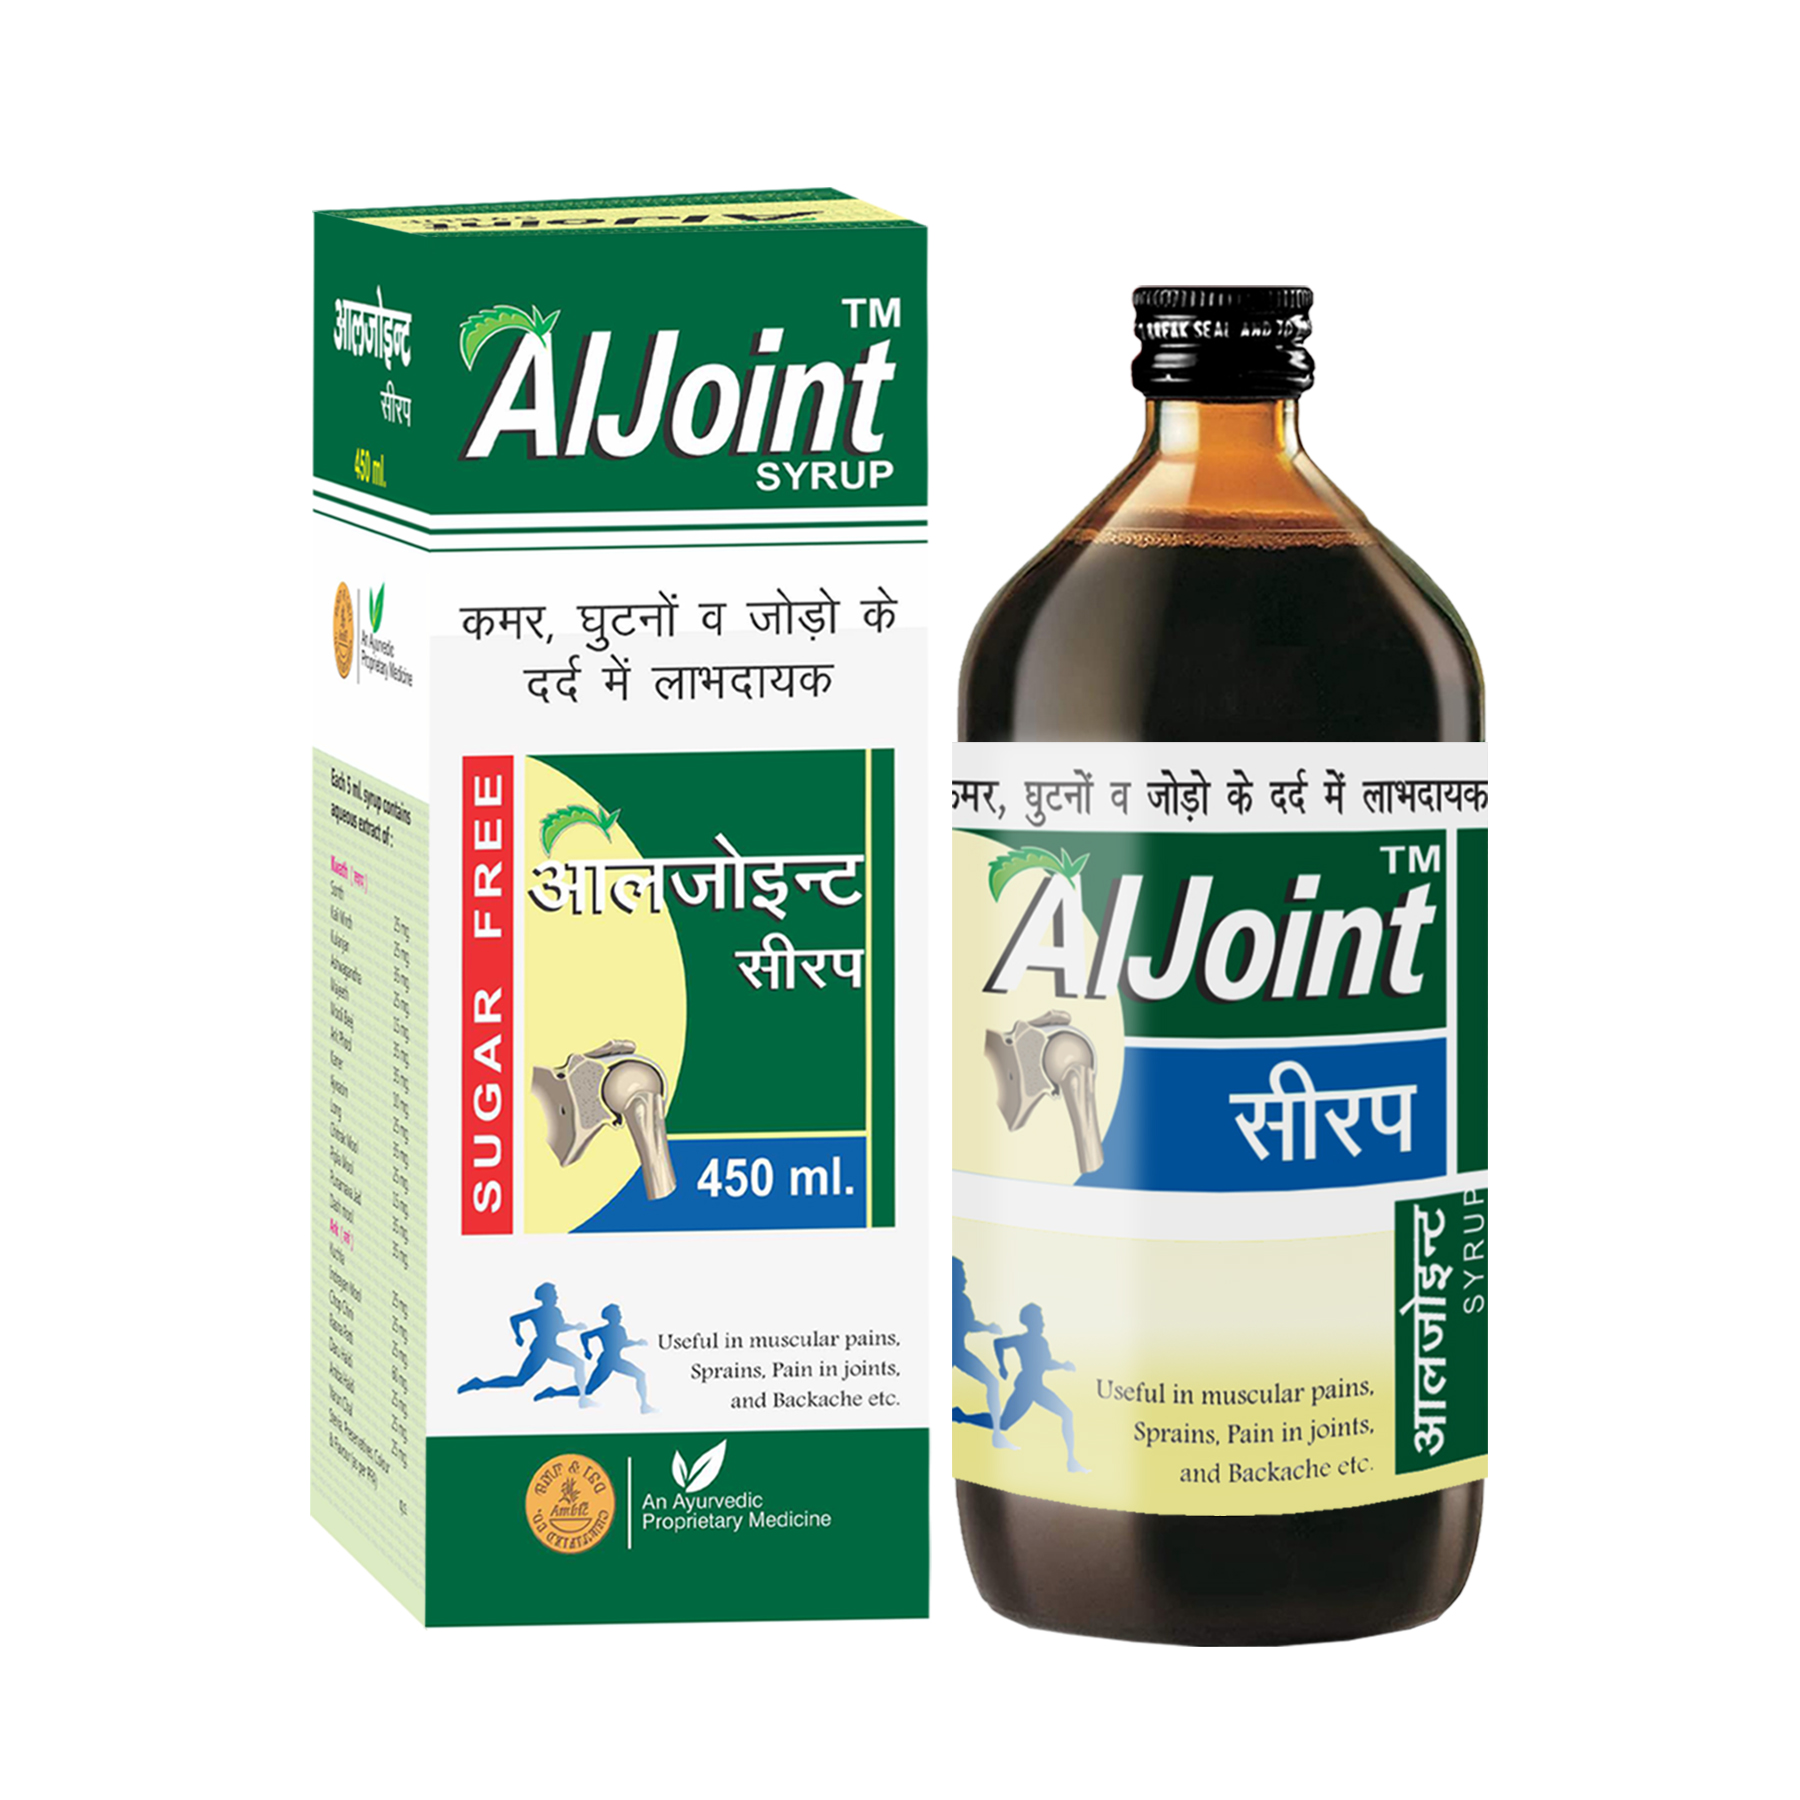 Aljoint Syrup